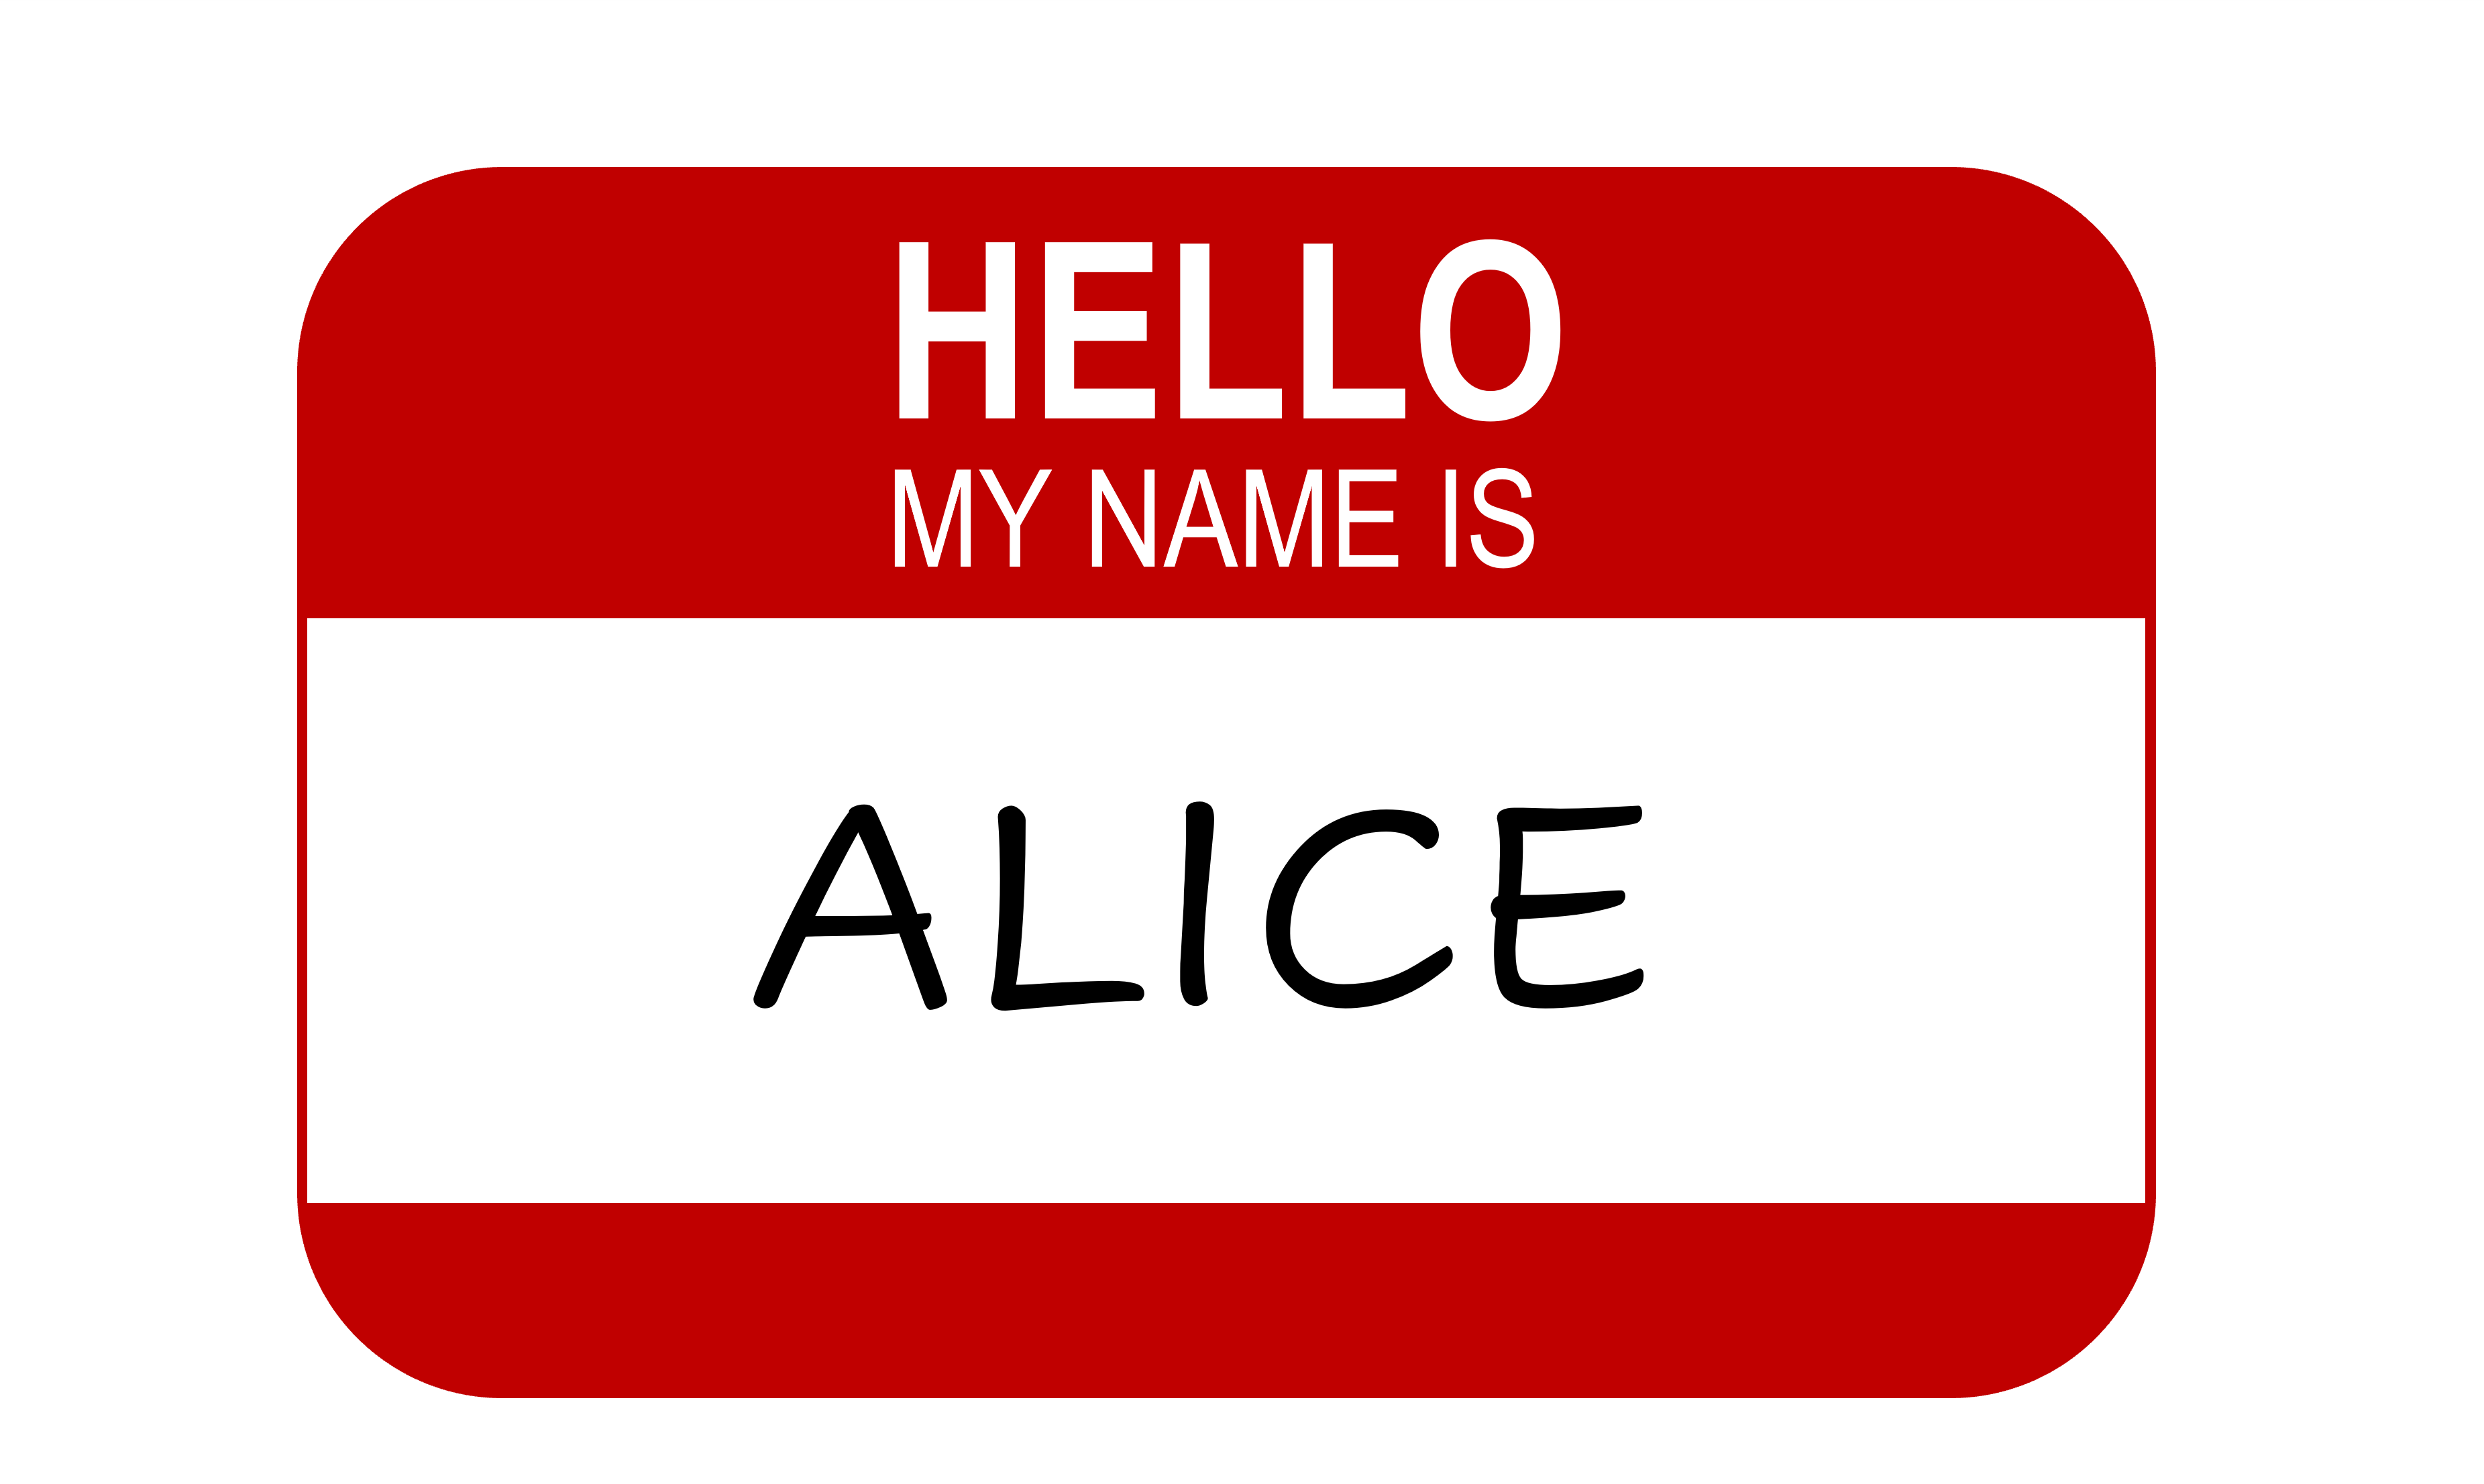 A name tag that reads "Hello, My Name is ALICE."